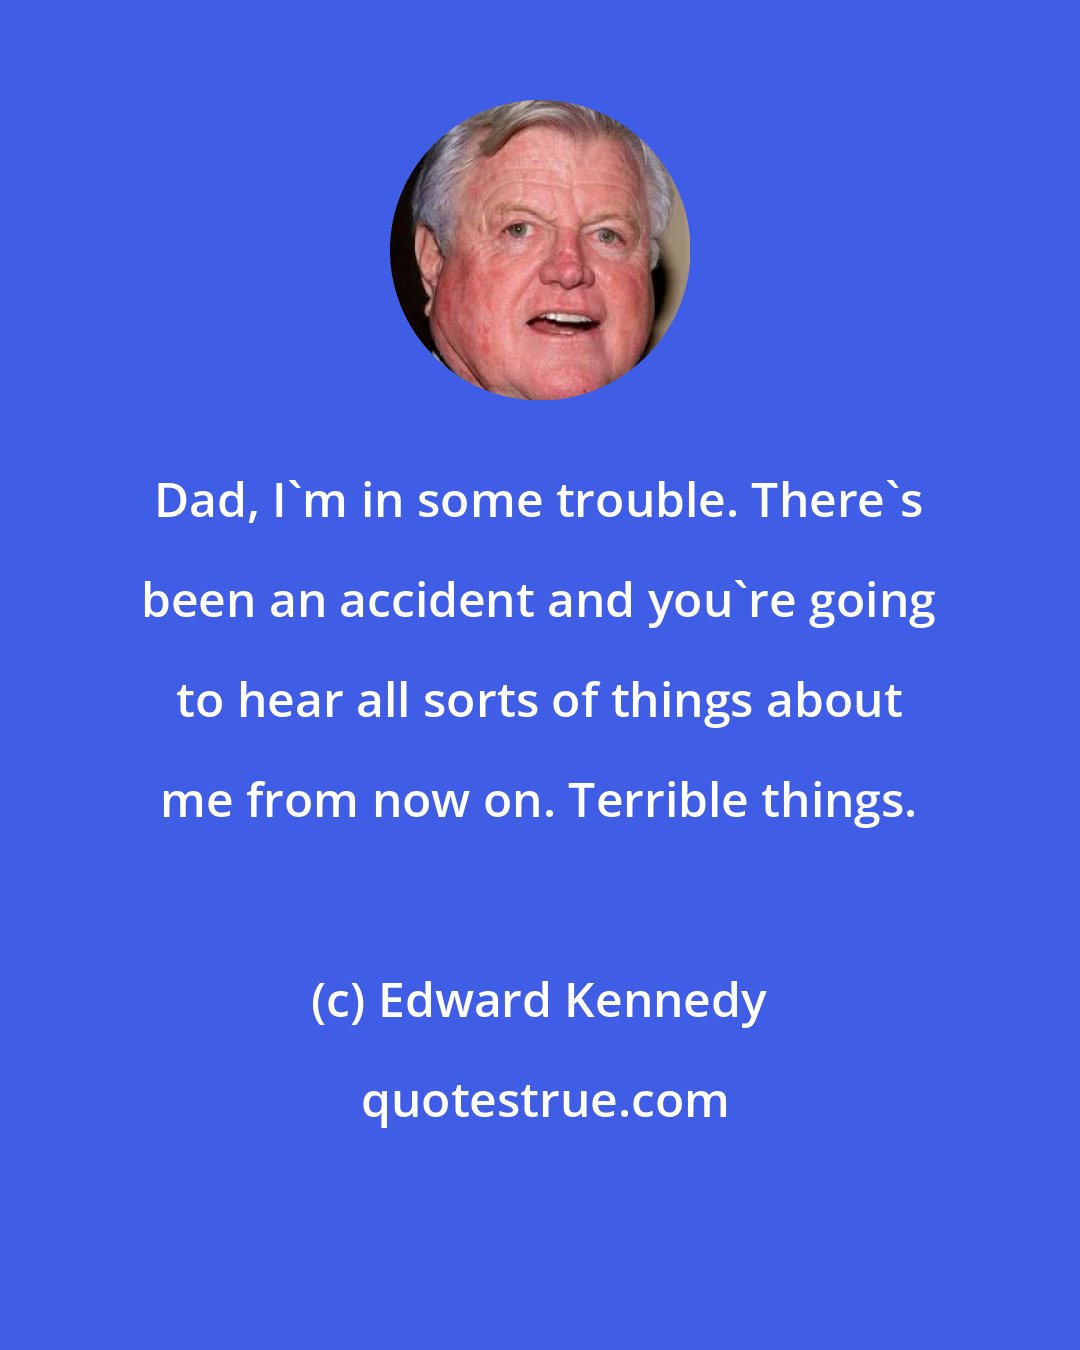 Edward Kennedy: Dad, I'm in some trouble. There's been an accident and you're going to hear all sorts of things about me from now on. Terrible things.